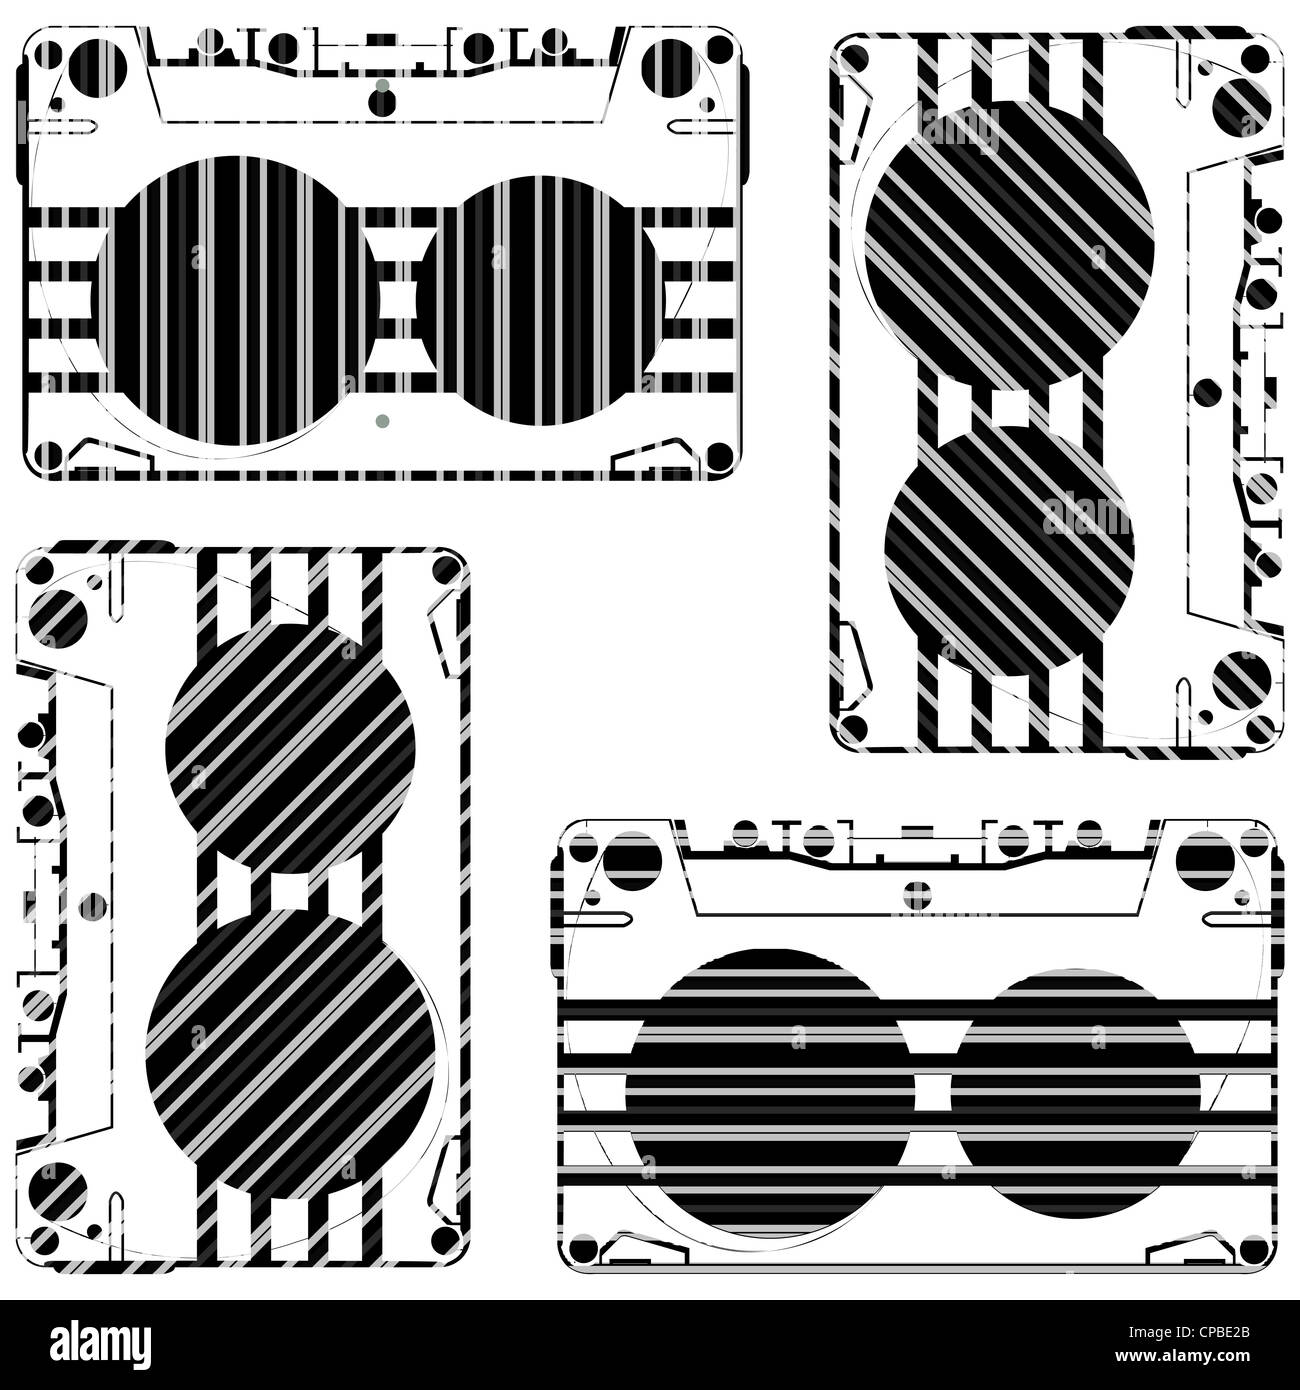 striped audio tapes against white background, abstract vector art illustration Stock Photo